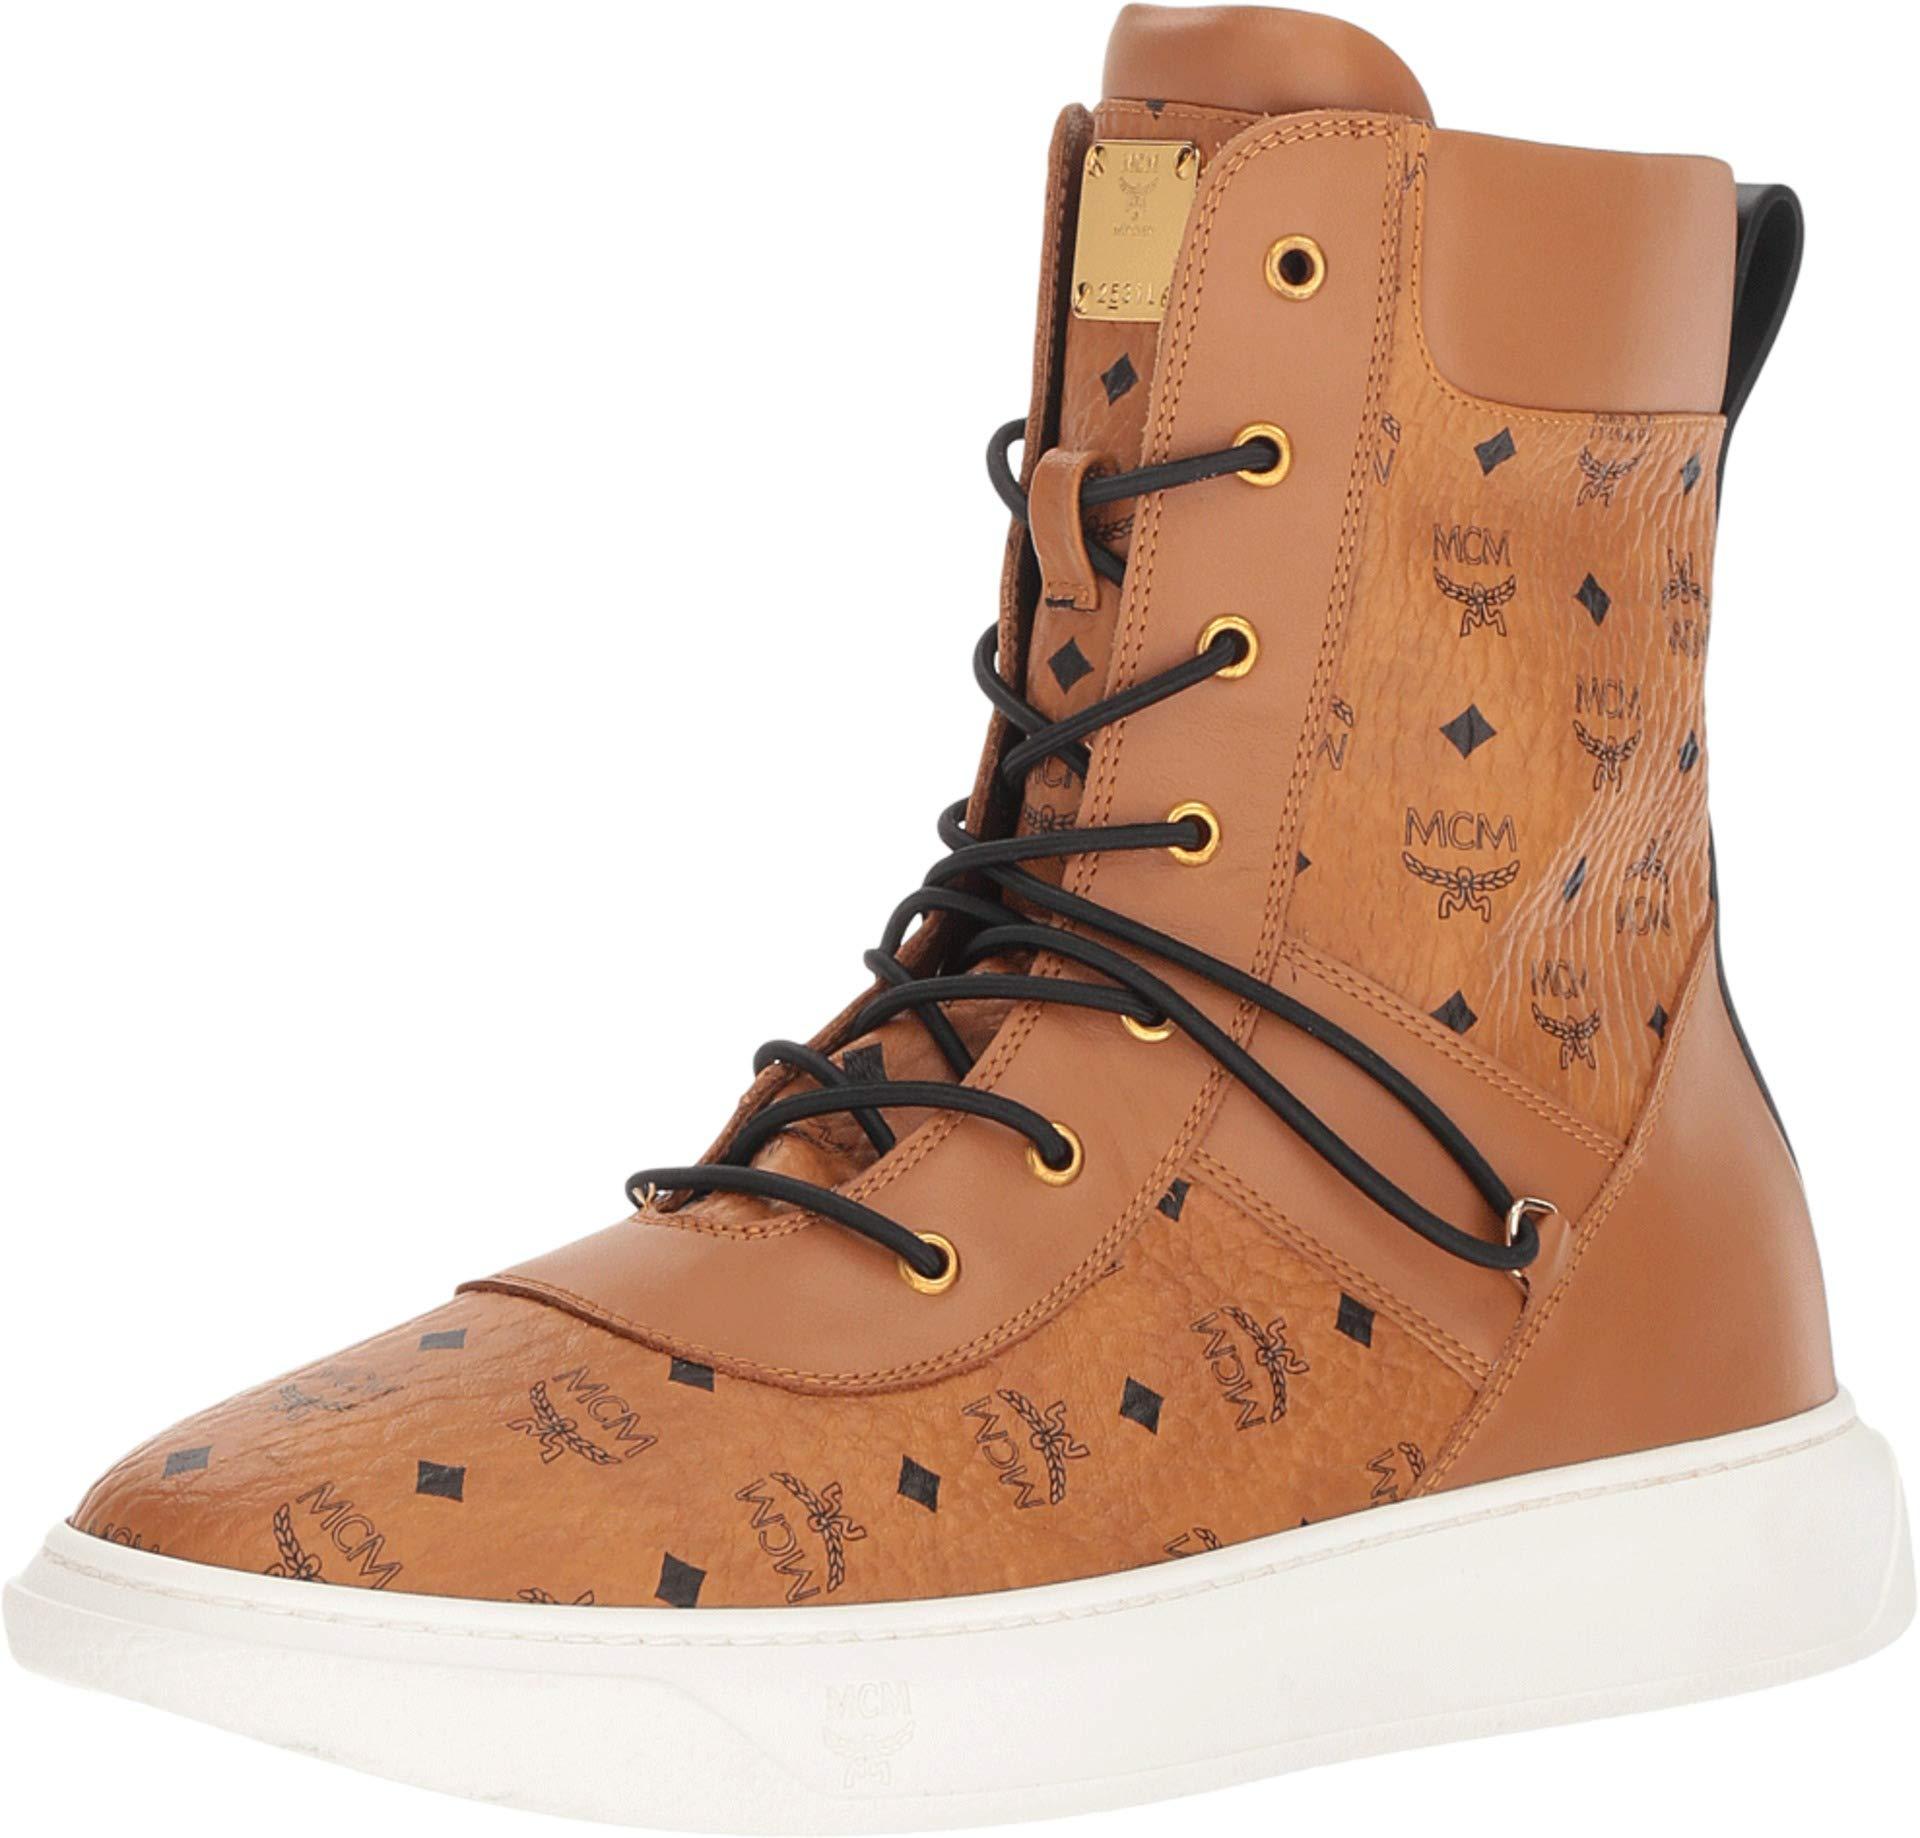 MCM Canvas Logo Group Boots in Cognac (Brown) for Men - Lyst